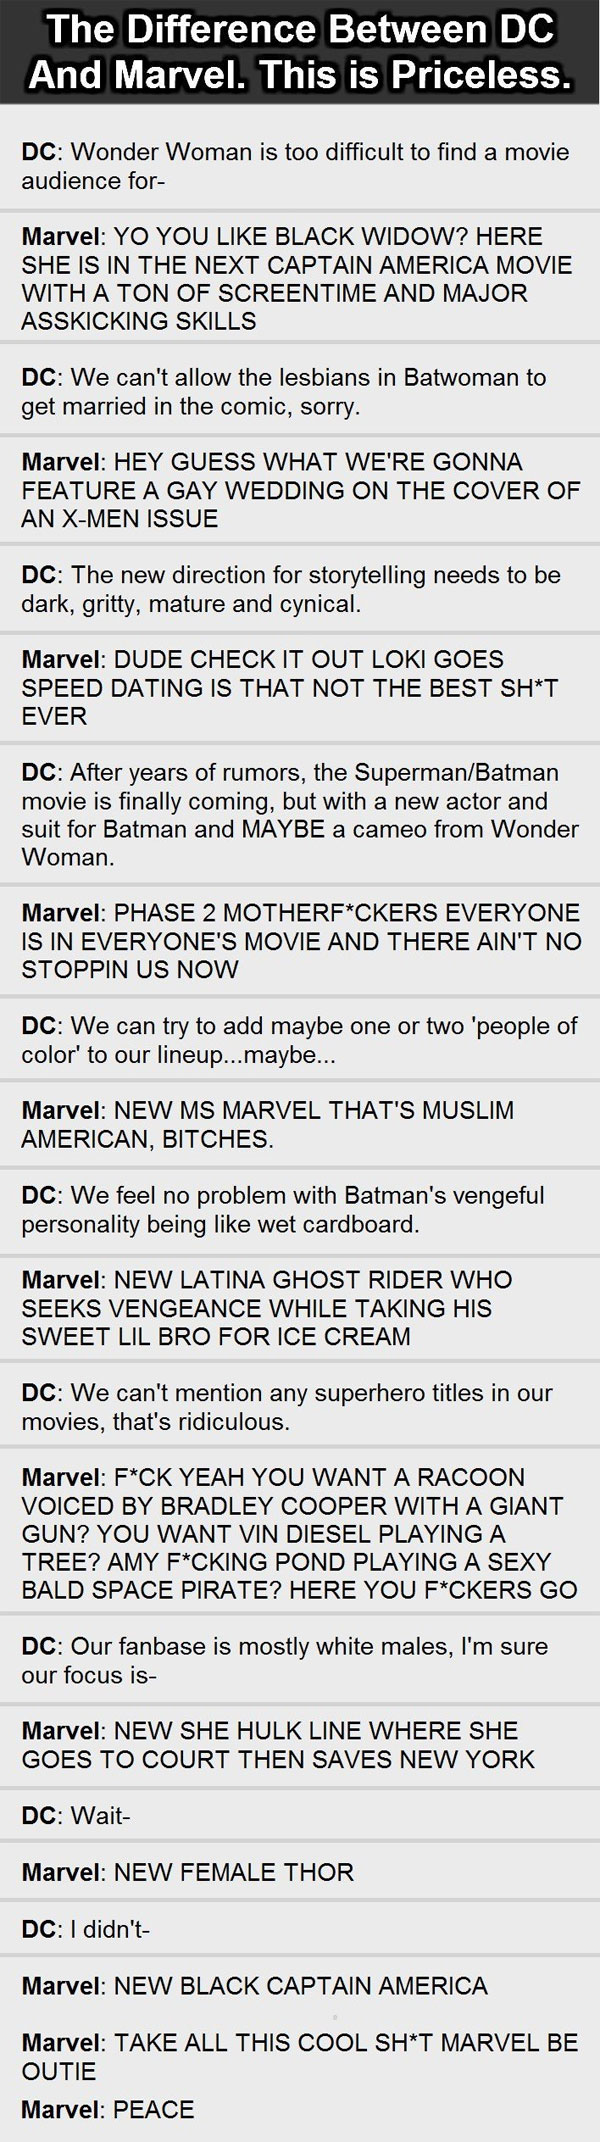 The Difference Between DC and Marvel.jpg